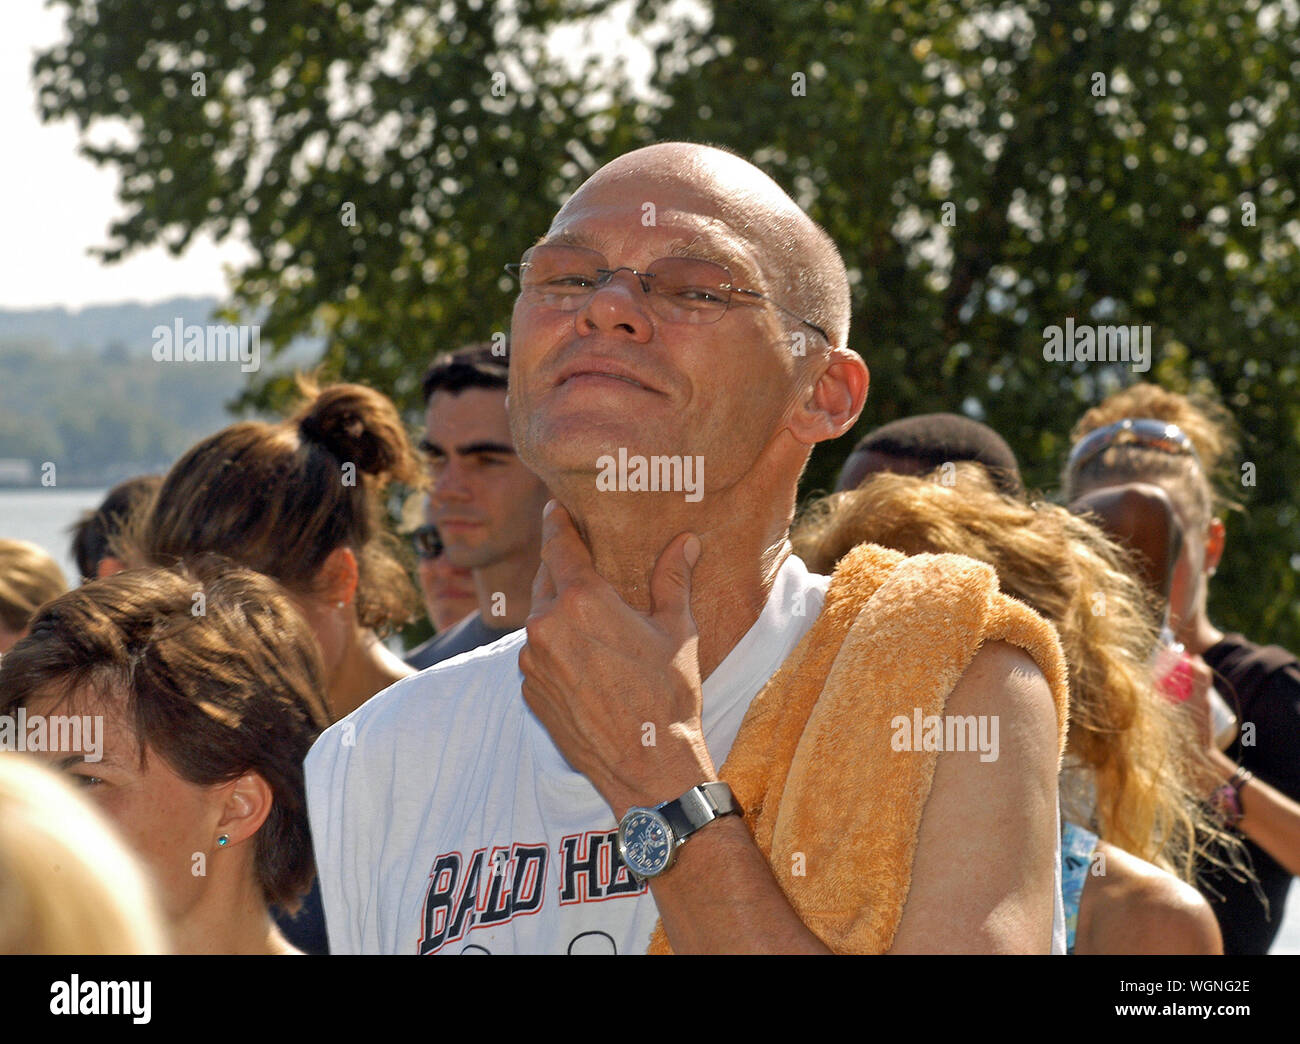 Alexandria Virginia, USA, September 17, 2005 Political strategist James Carville prepares to run in a 5k charity foot race to raise funds to provide relief for victims of Hurricane Katrina. Stock Photo